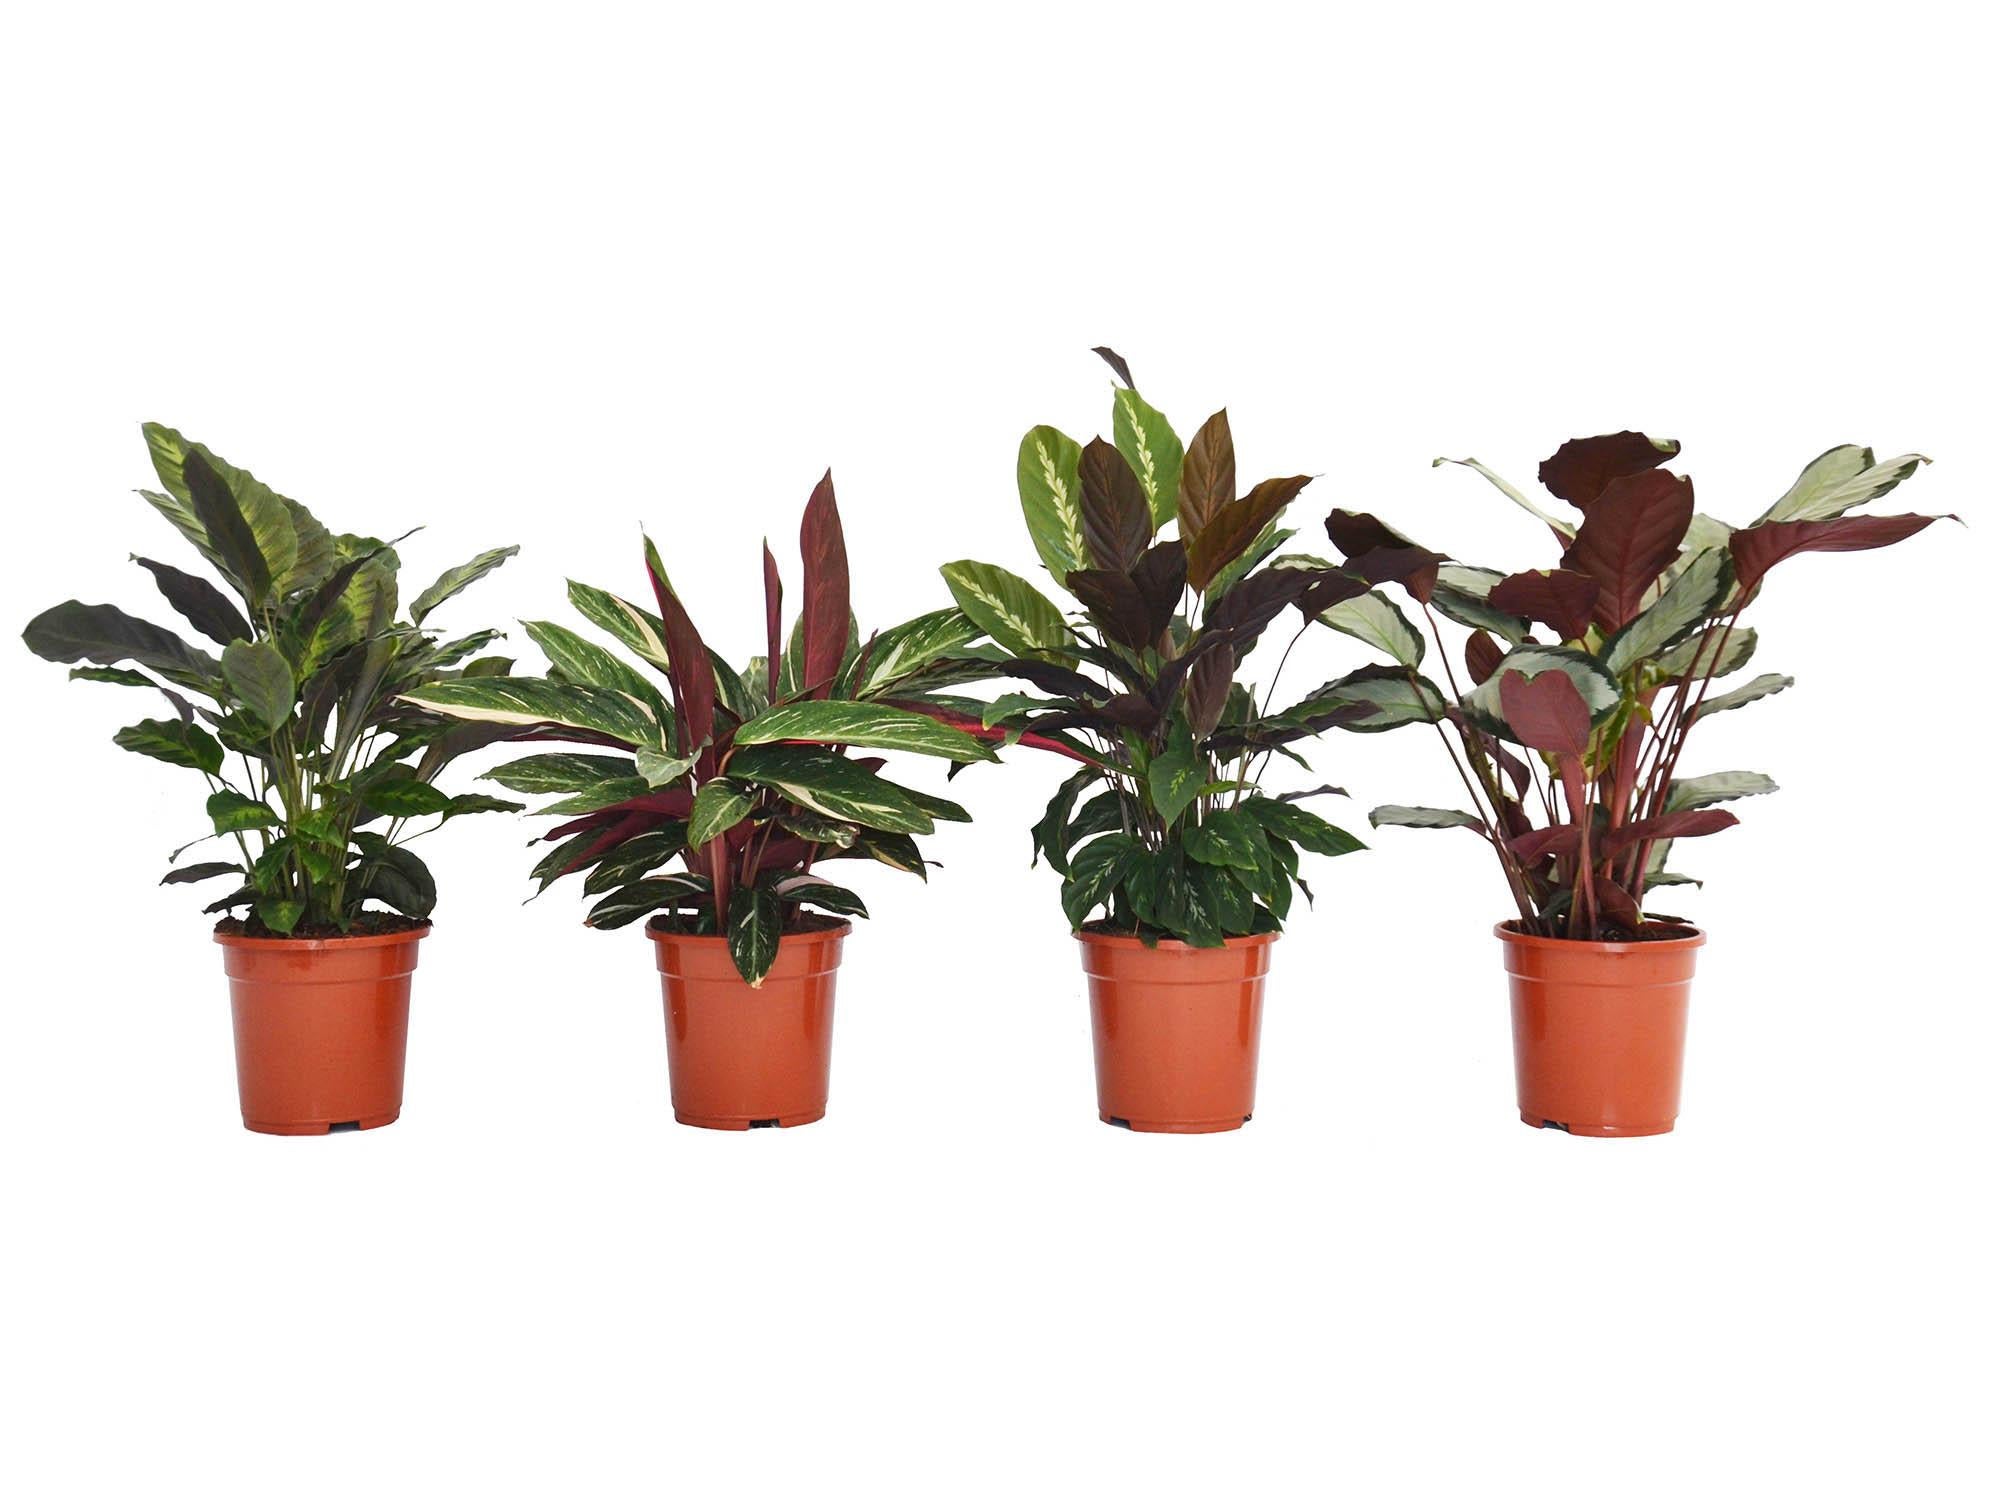 five of the hardiest houseplants that even you will find difficult to kill